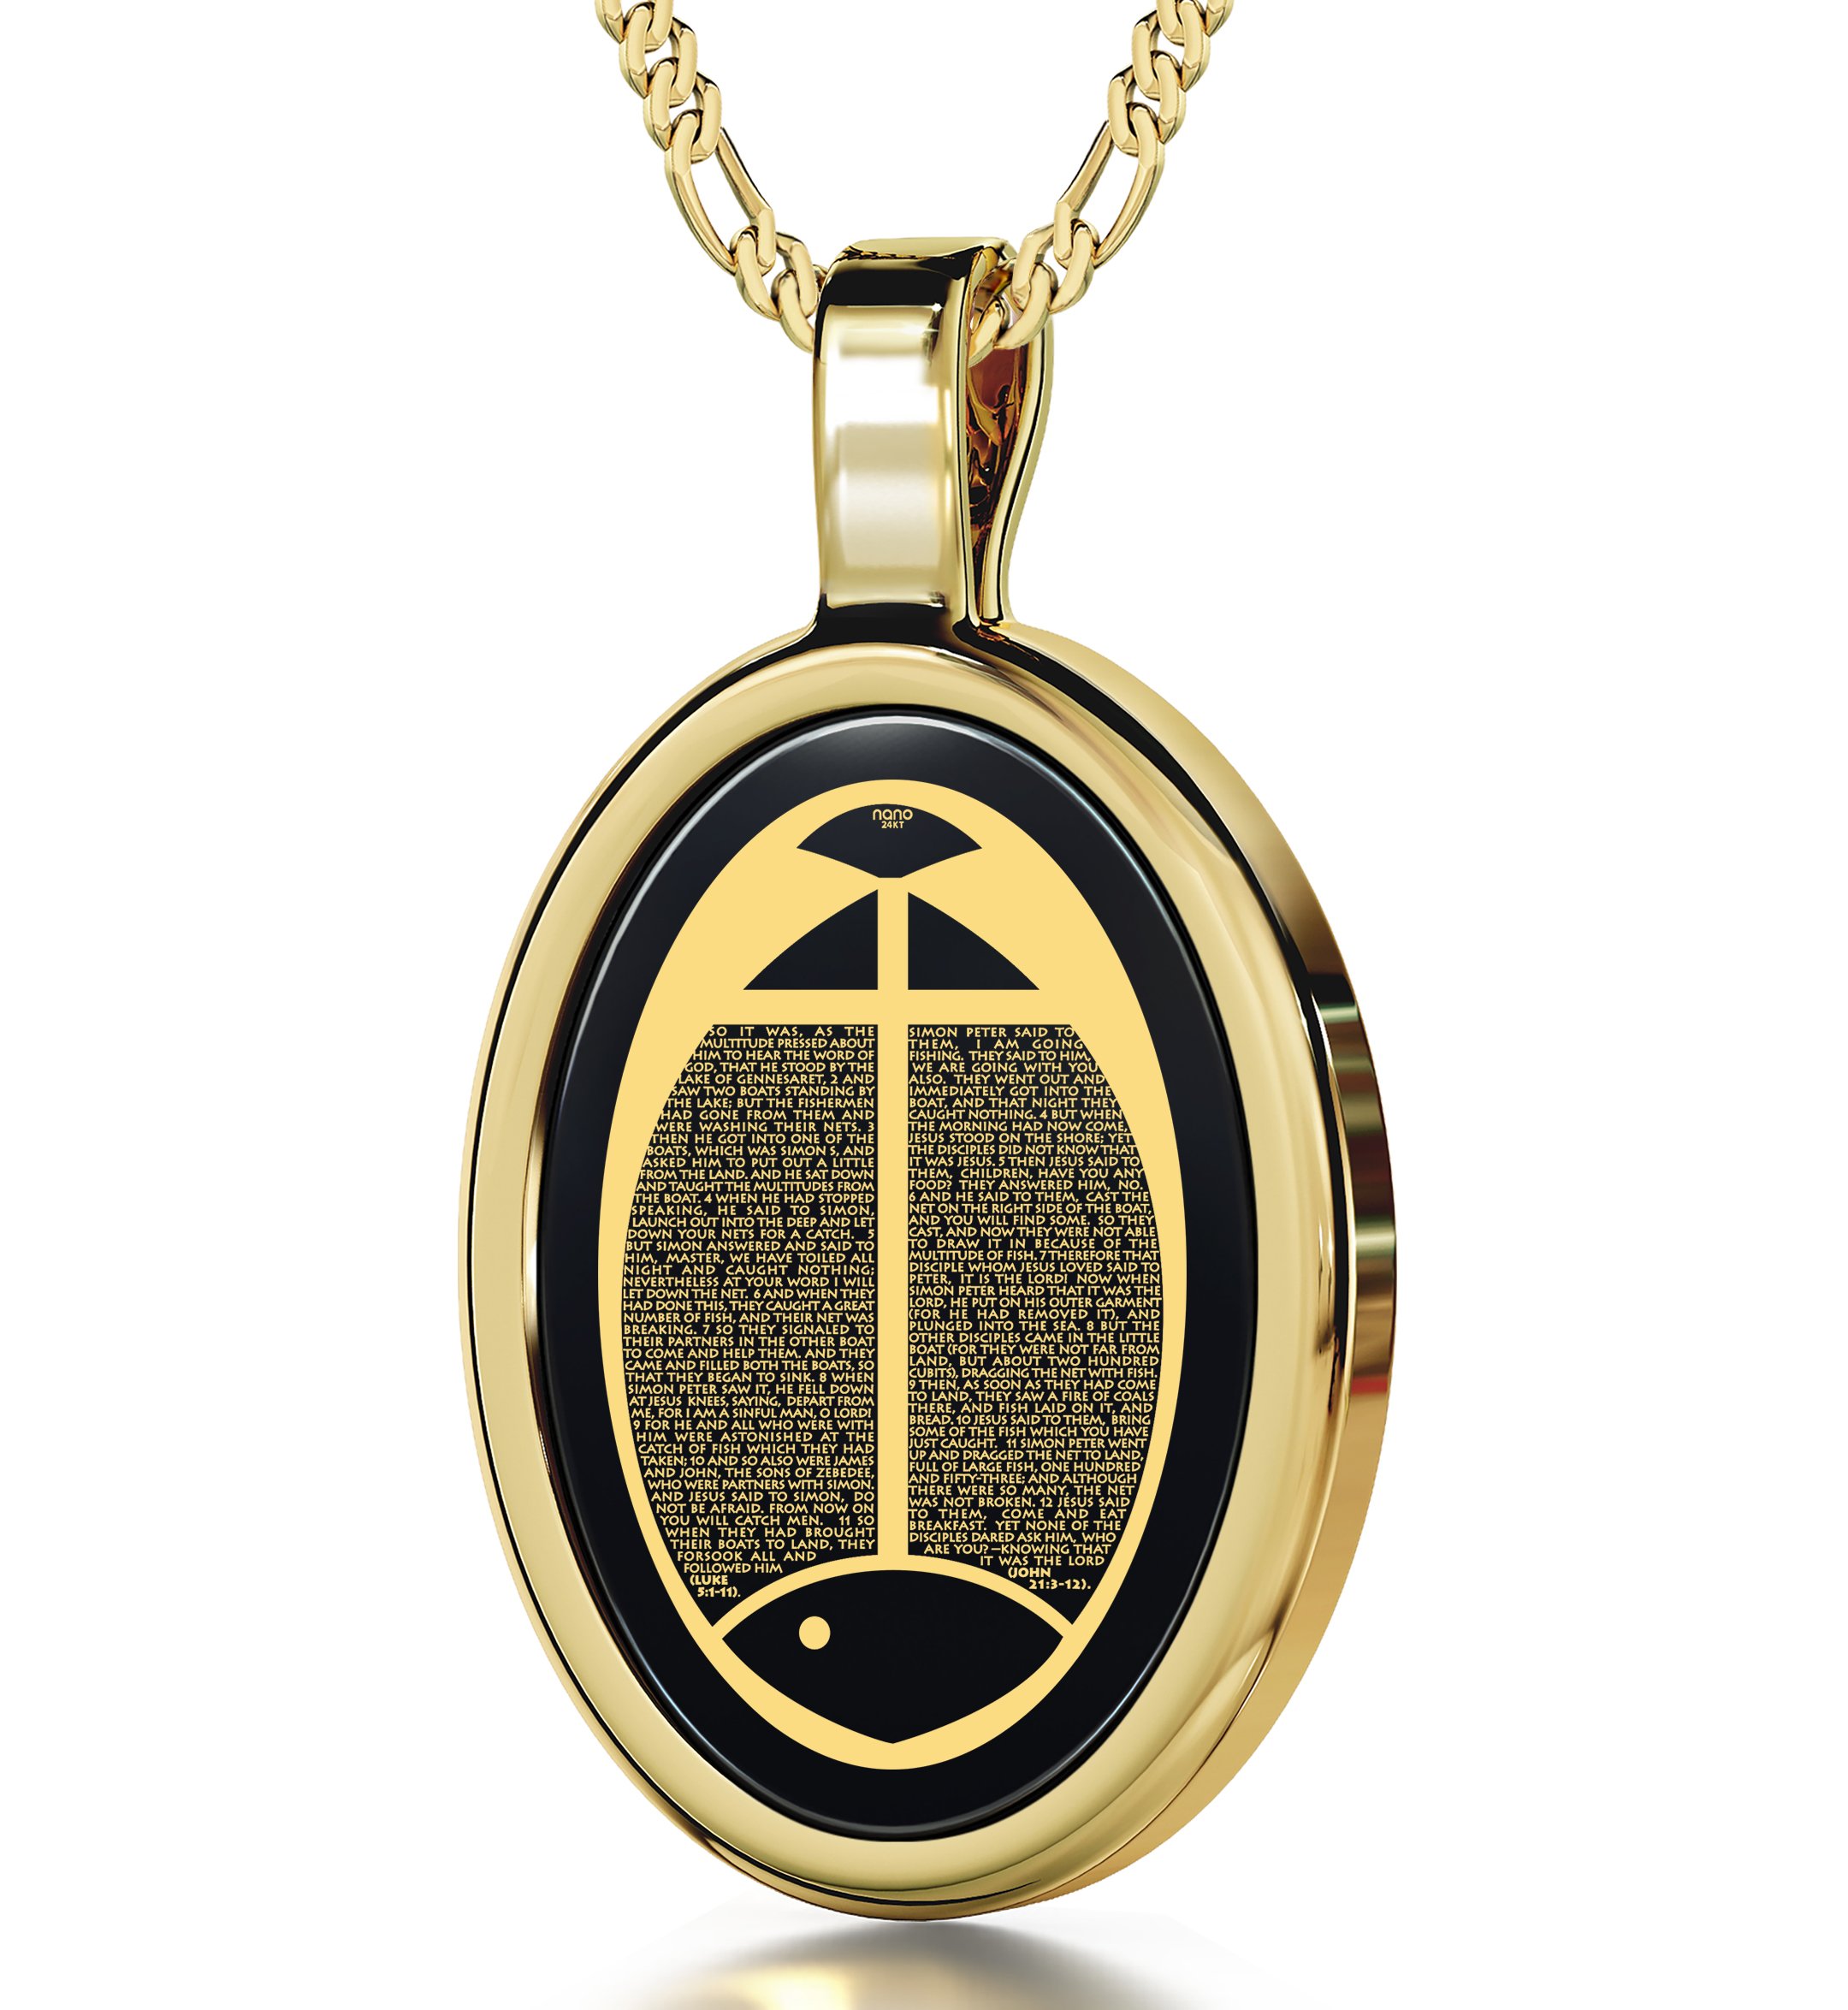 Nano Jewelry Christian Cross Necklace - Fish Pendant Inscribed with Luke 5:1-11 and John 21:3-12 in 24k Gold on Oval Black Onyx Stone, 18